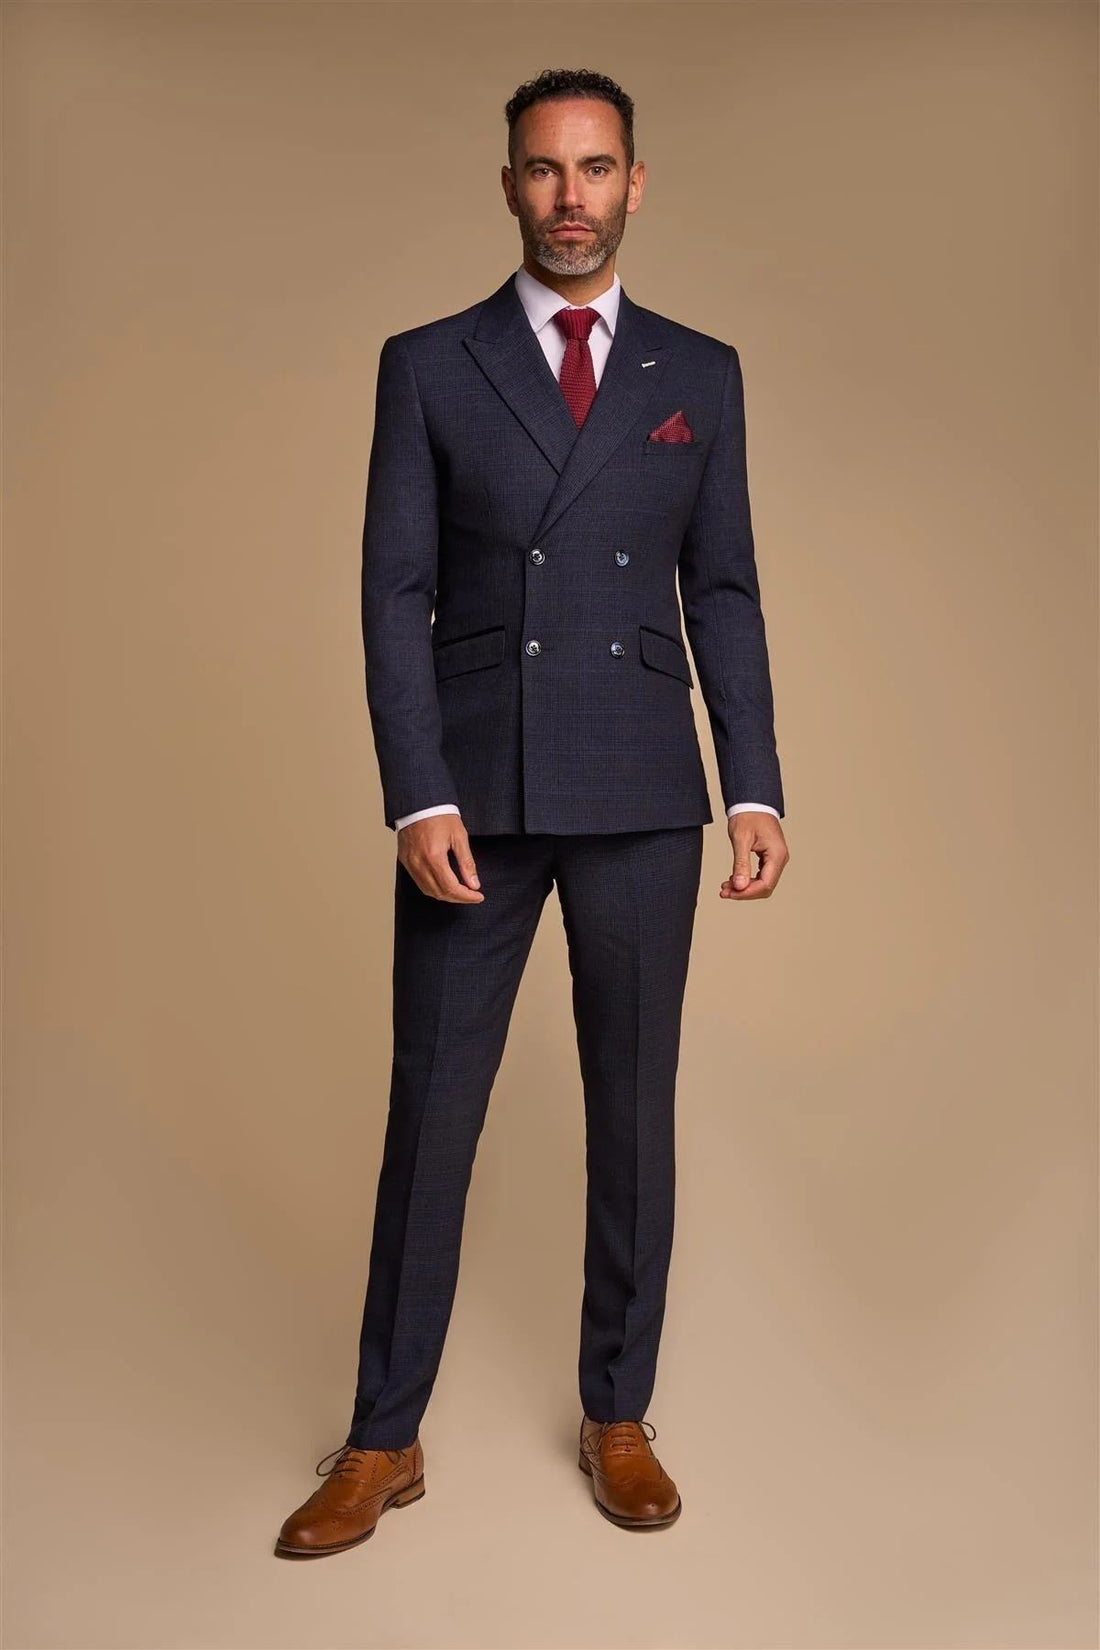 Men's Suit 2 Piece Navy Blue Double Breasted Tailored Fit